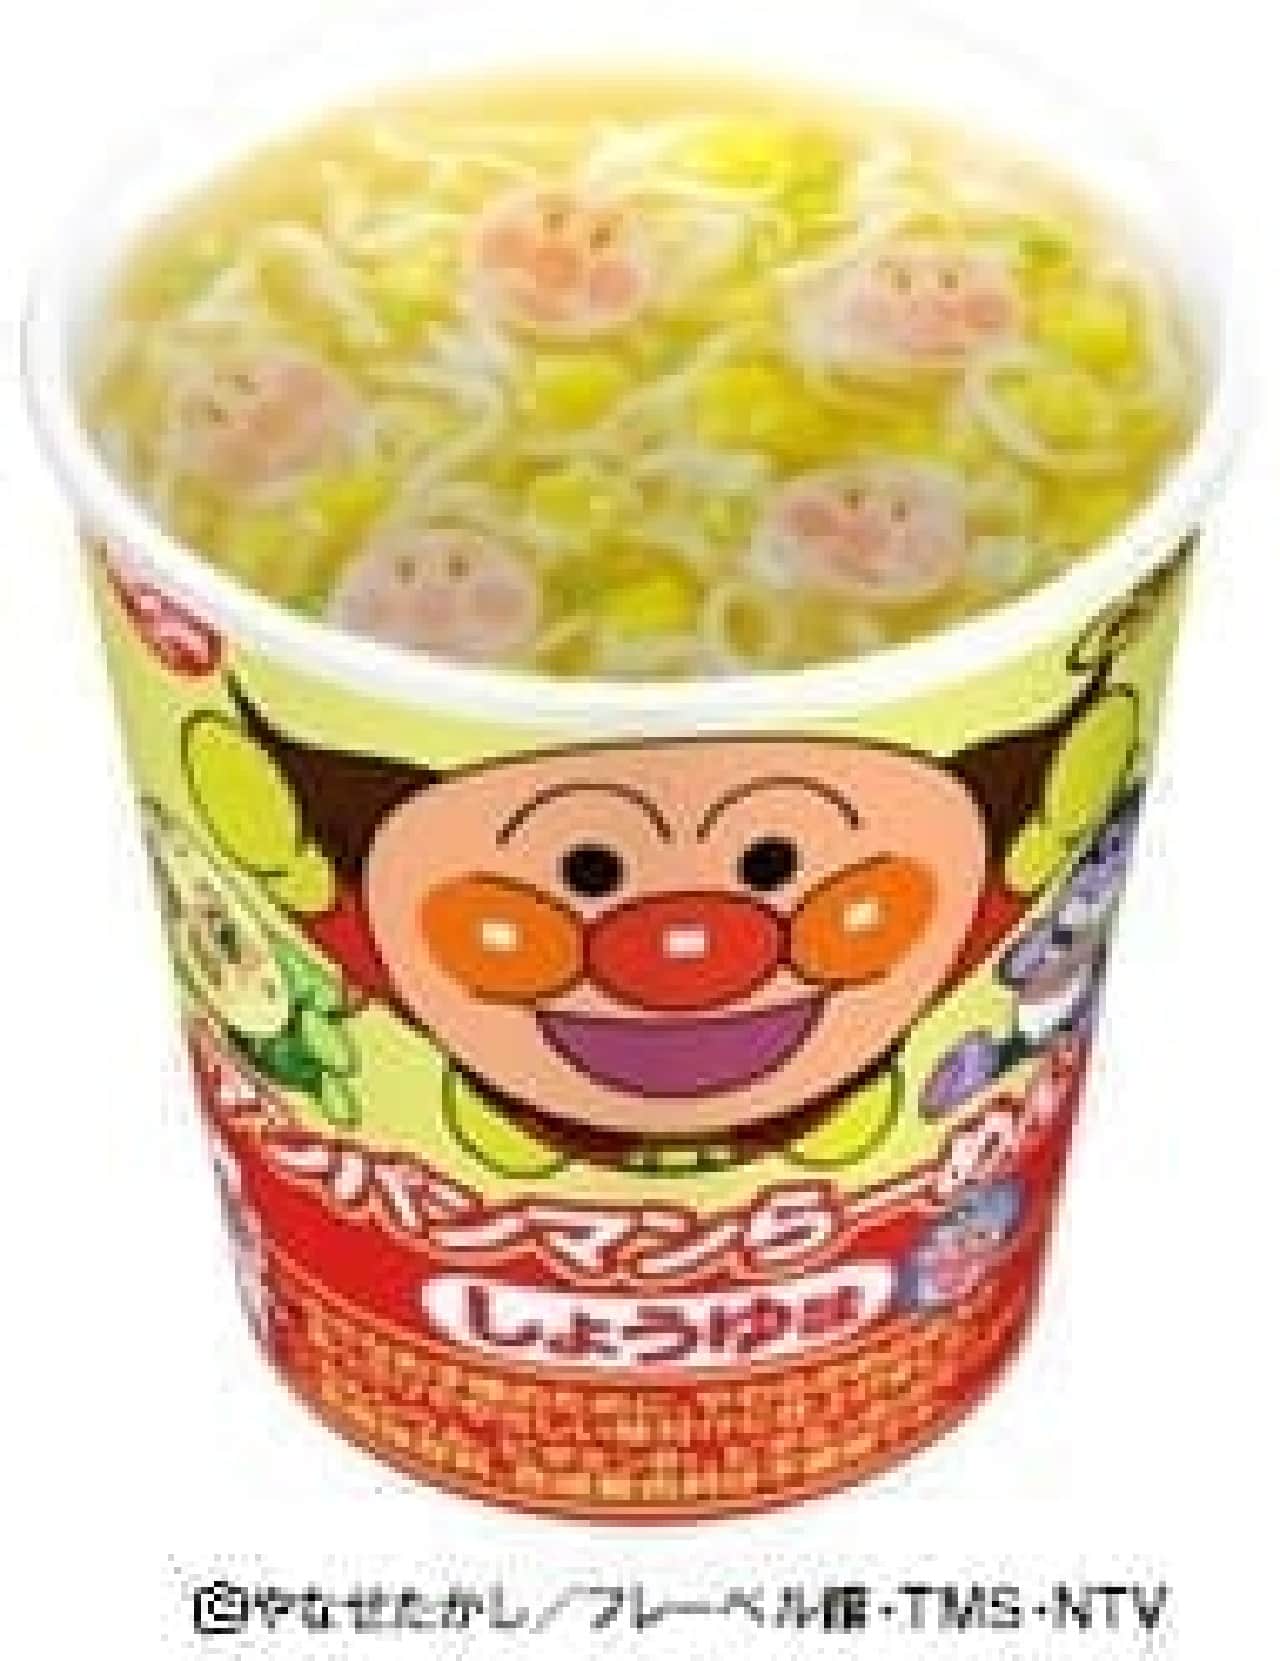 Anpanman collaborates with cup noodles for the first time